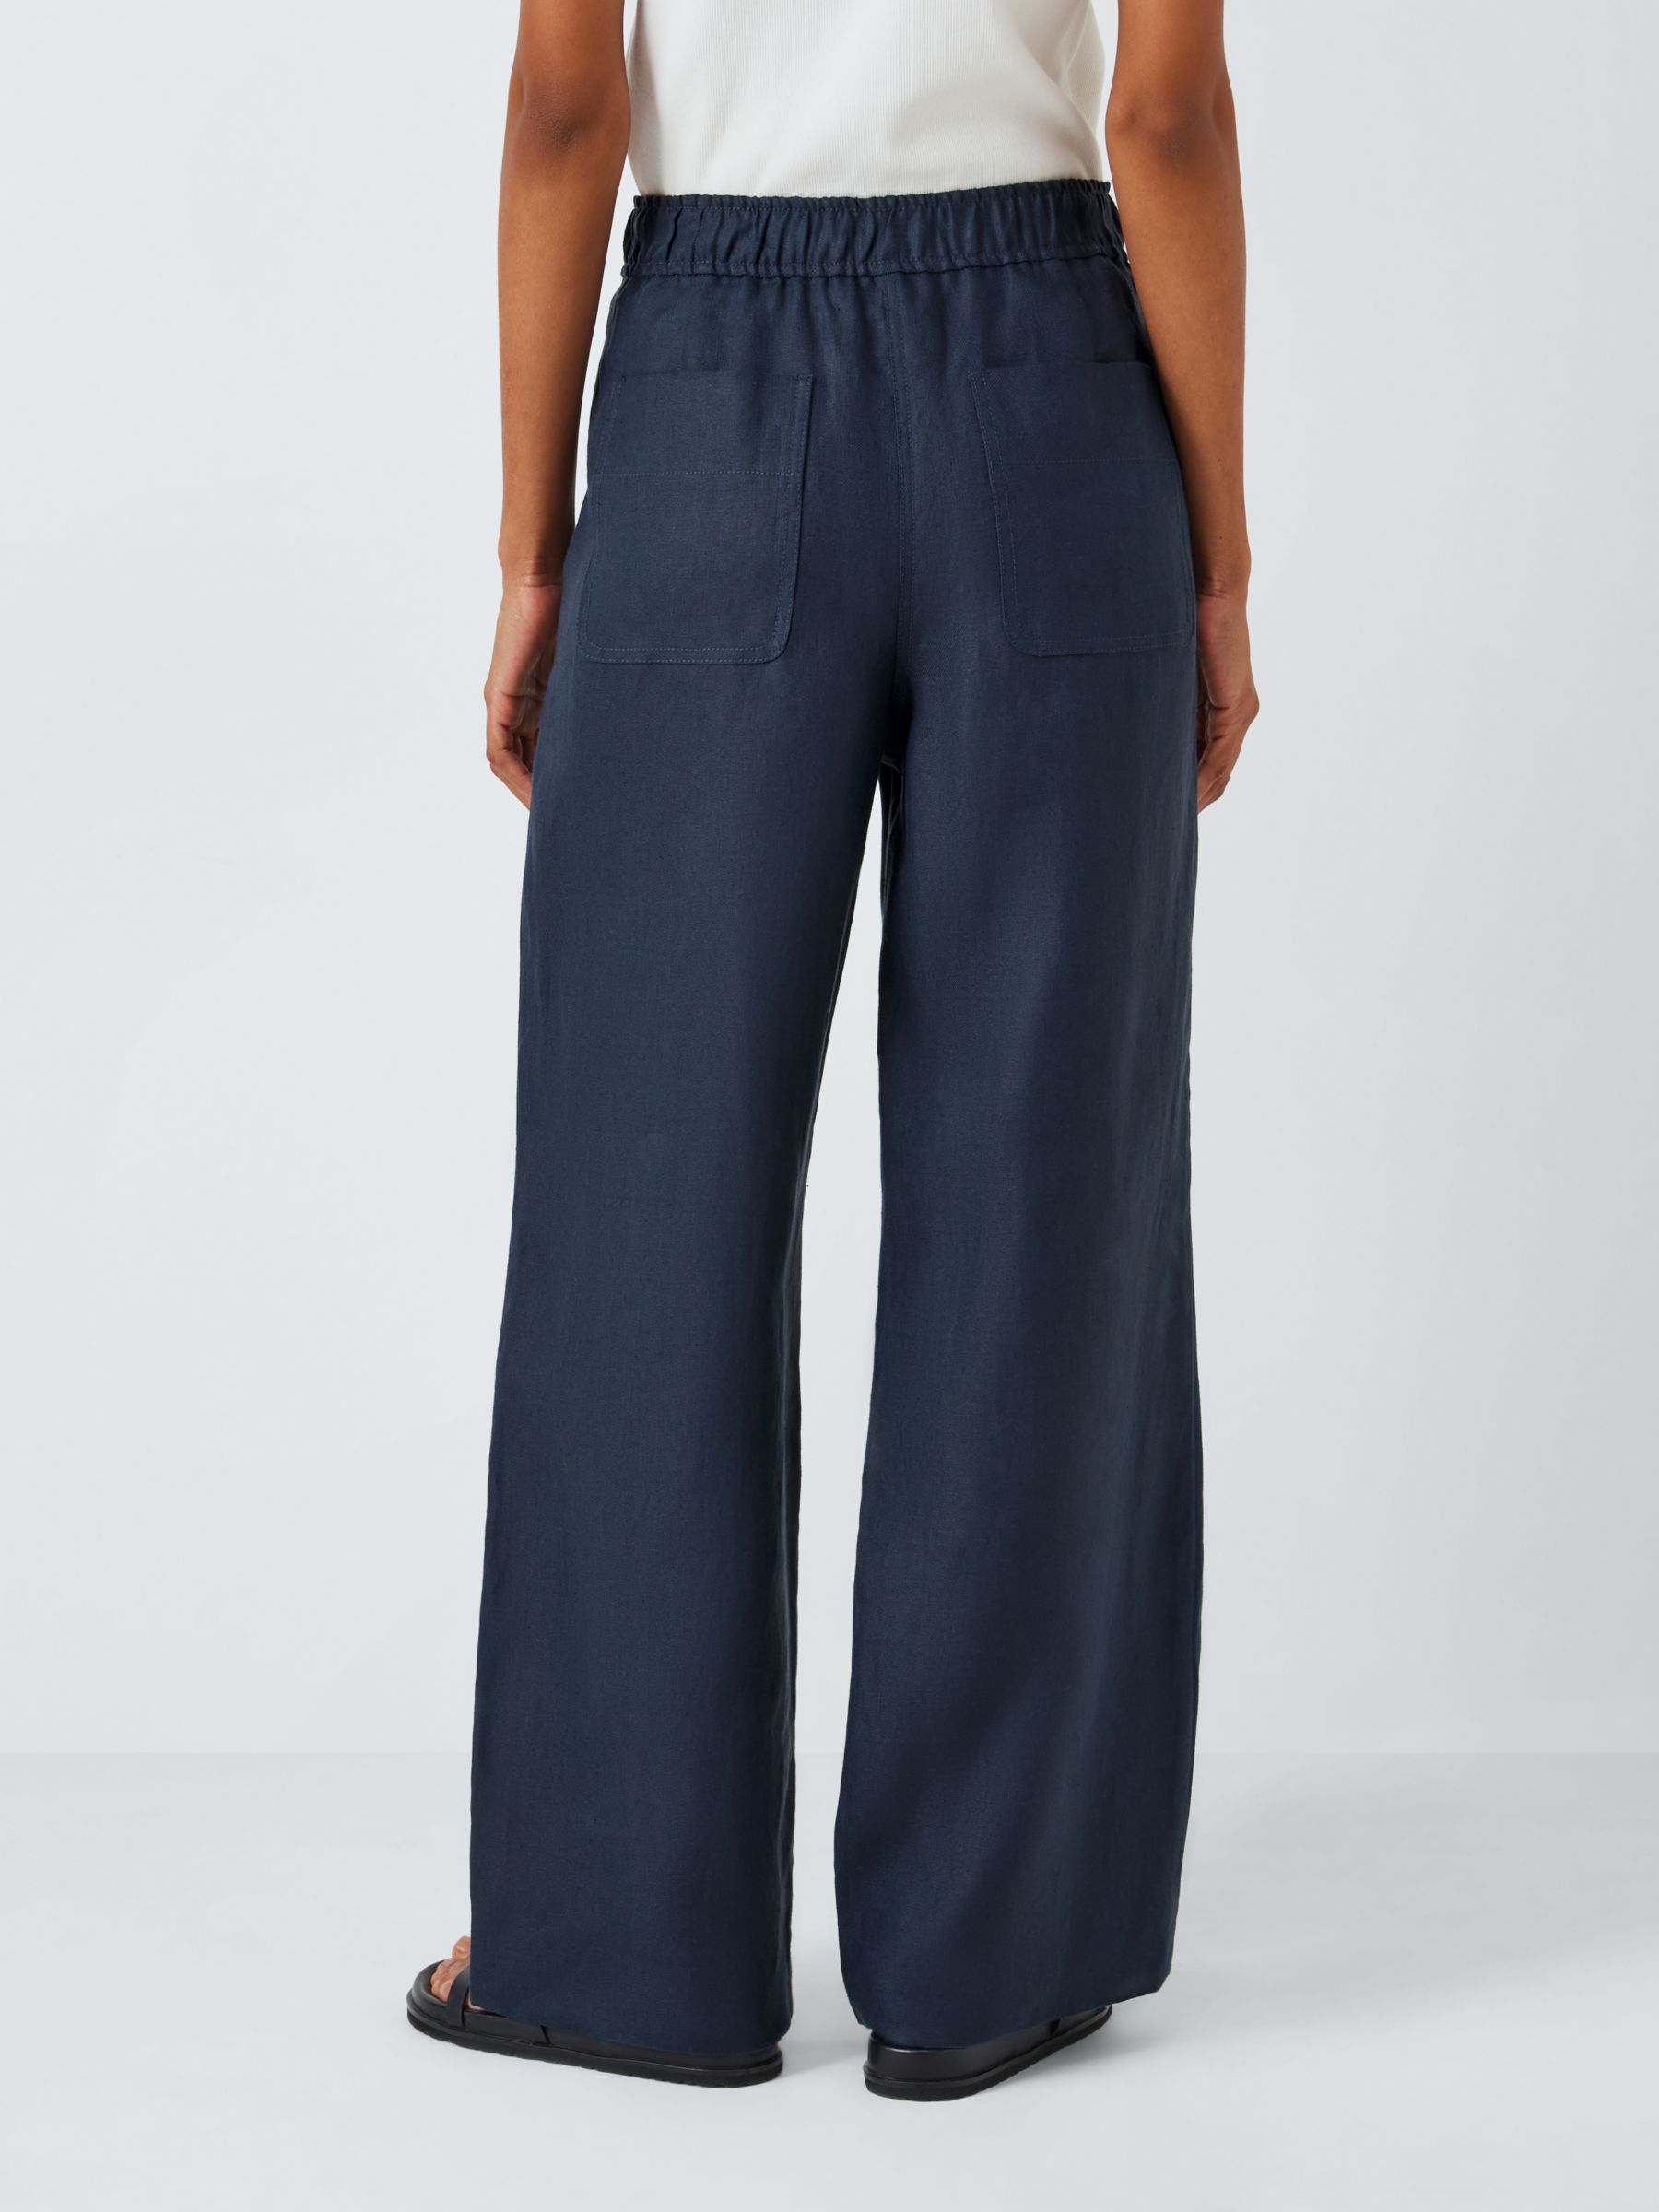 John Lewis Straight Fit Linen Trousers, Navy, 8S